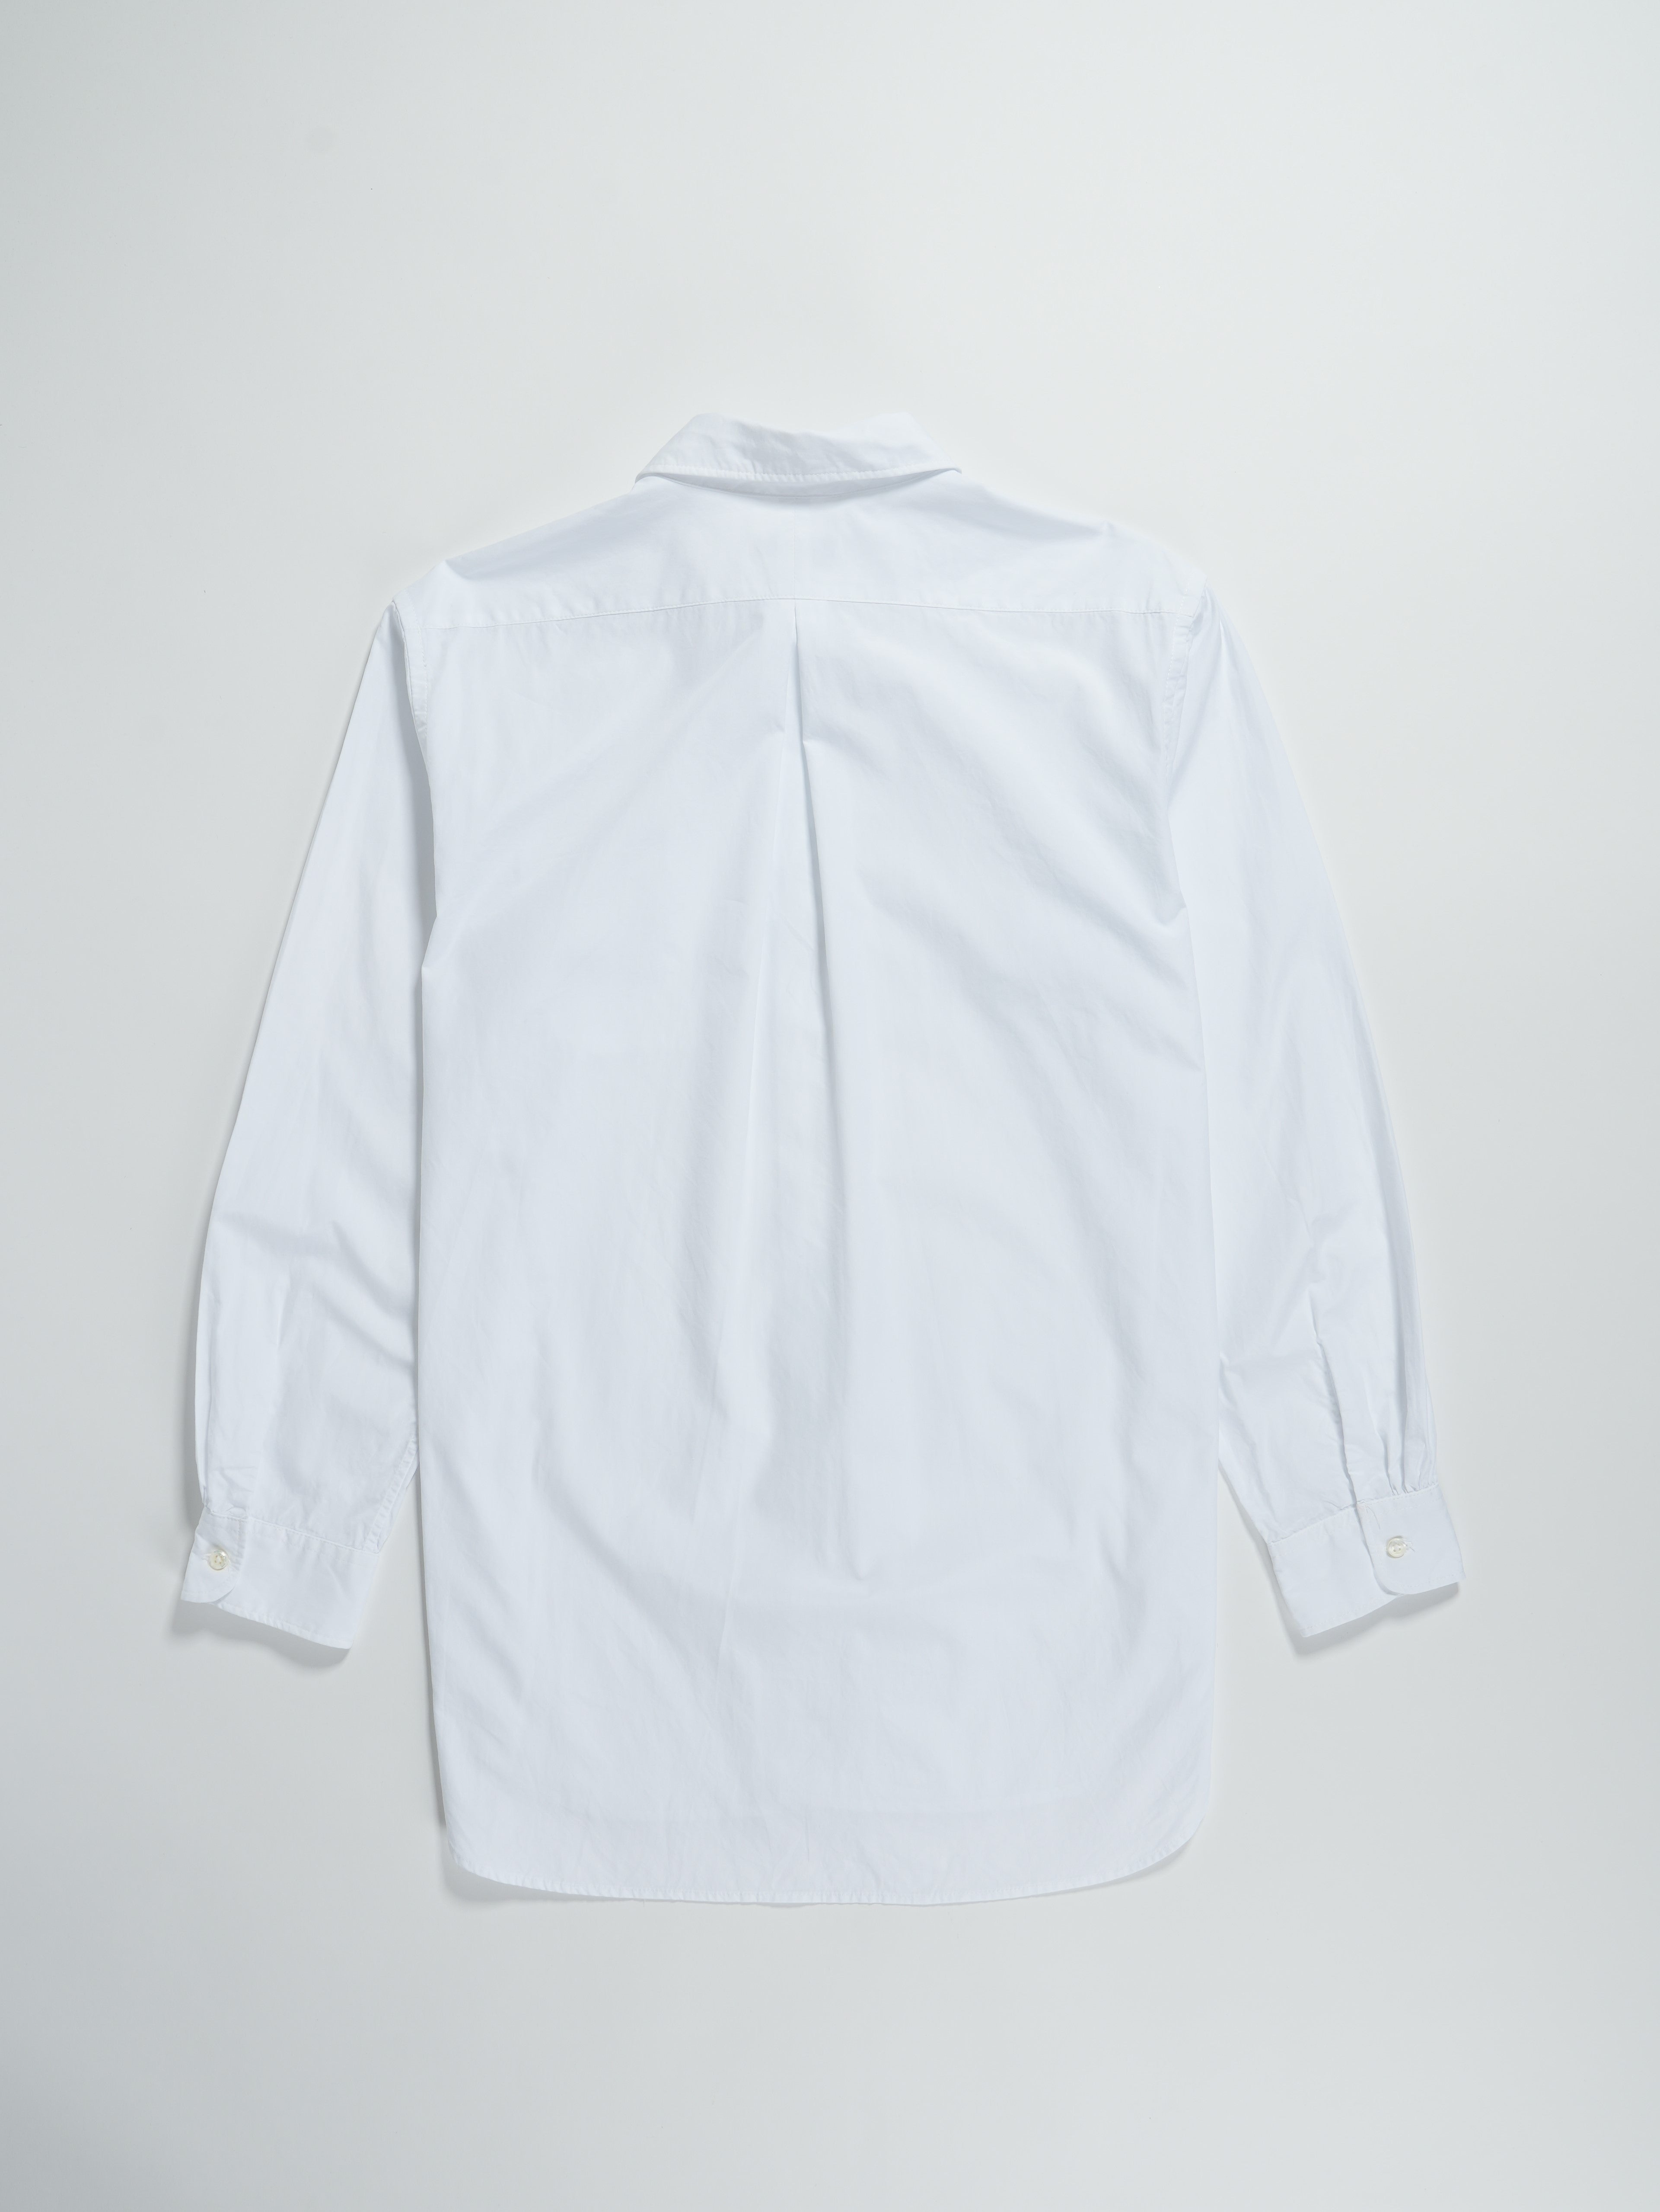 Rounded Collar Shirt - White 100's 2Ply Broadcloth